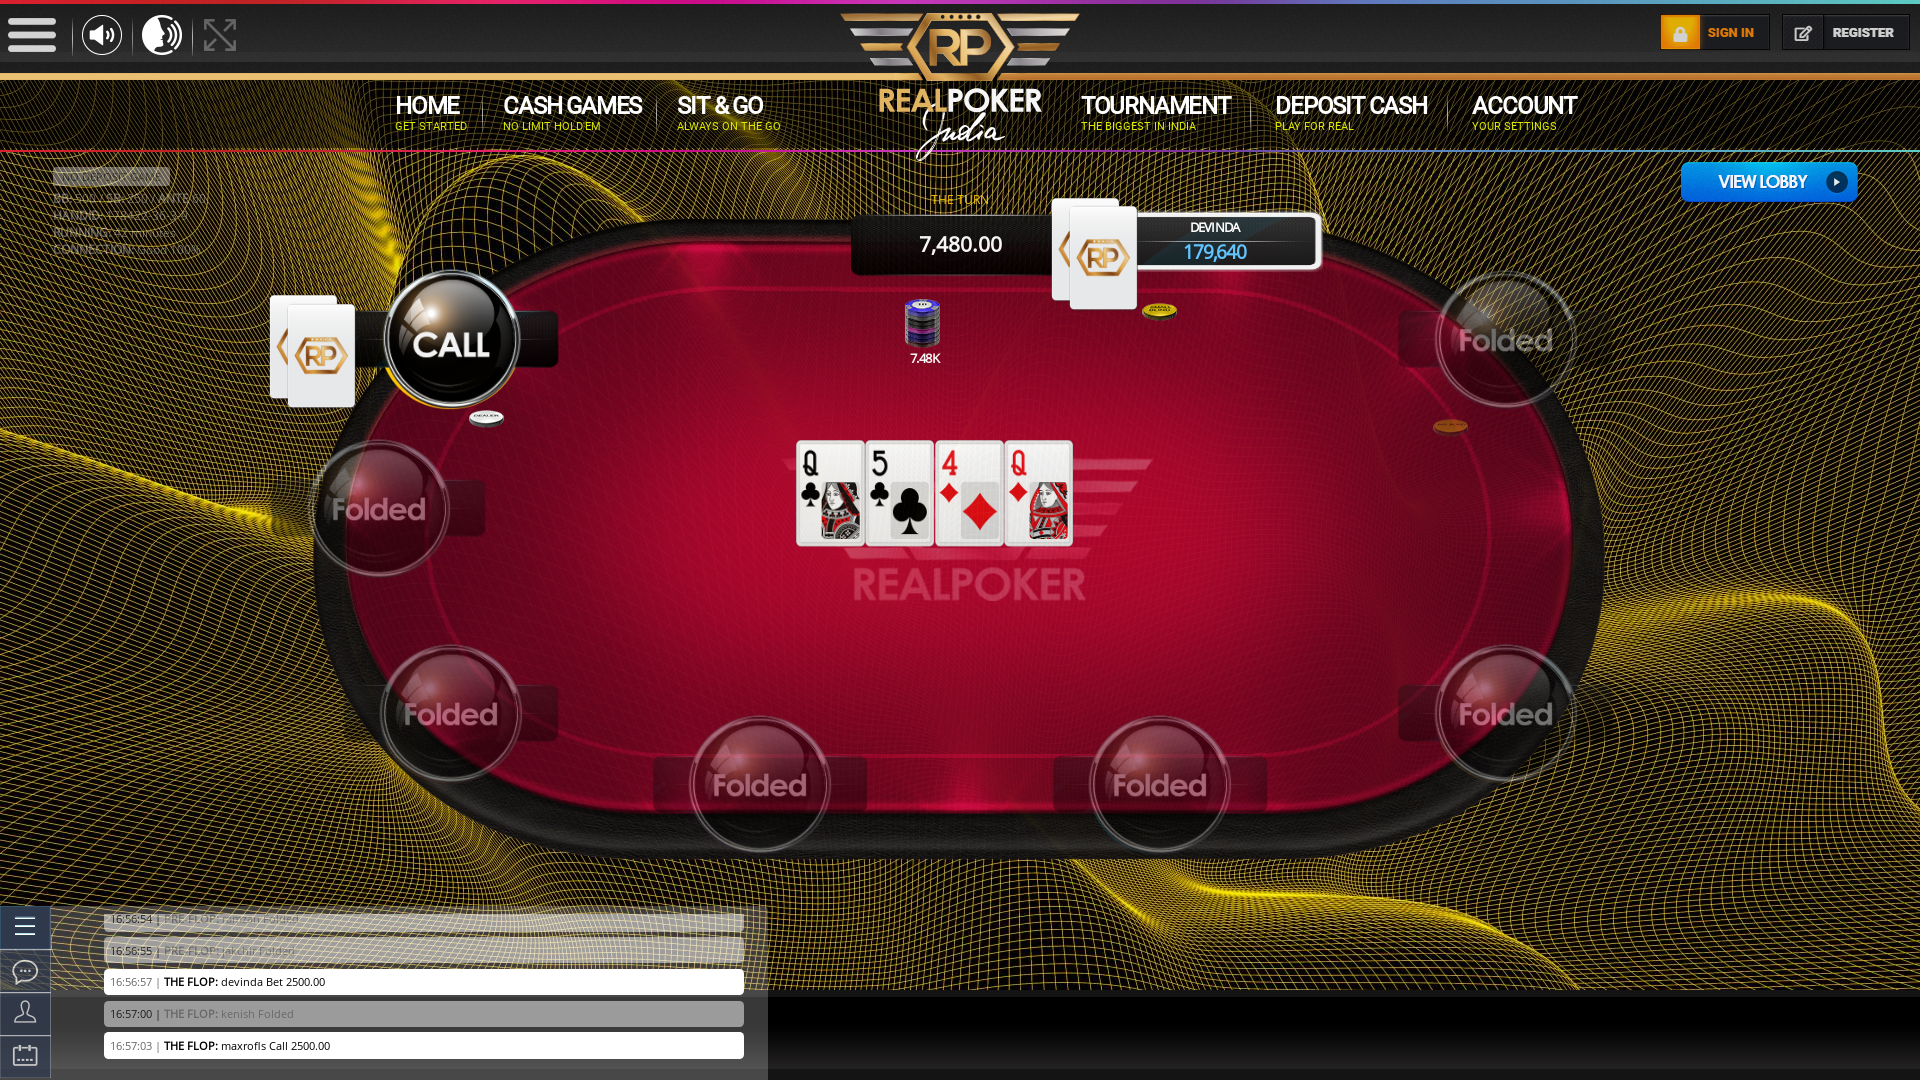 Indian online poker on a 10 player table in the 41st minute match up